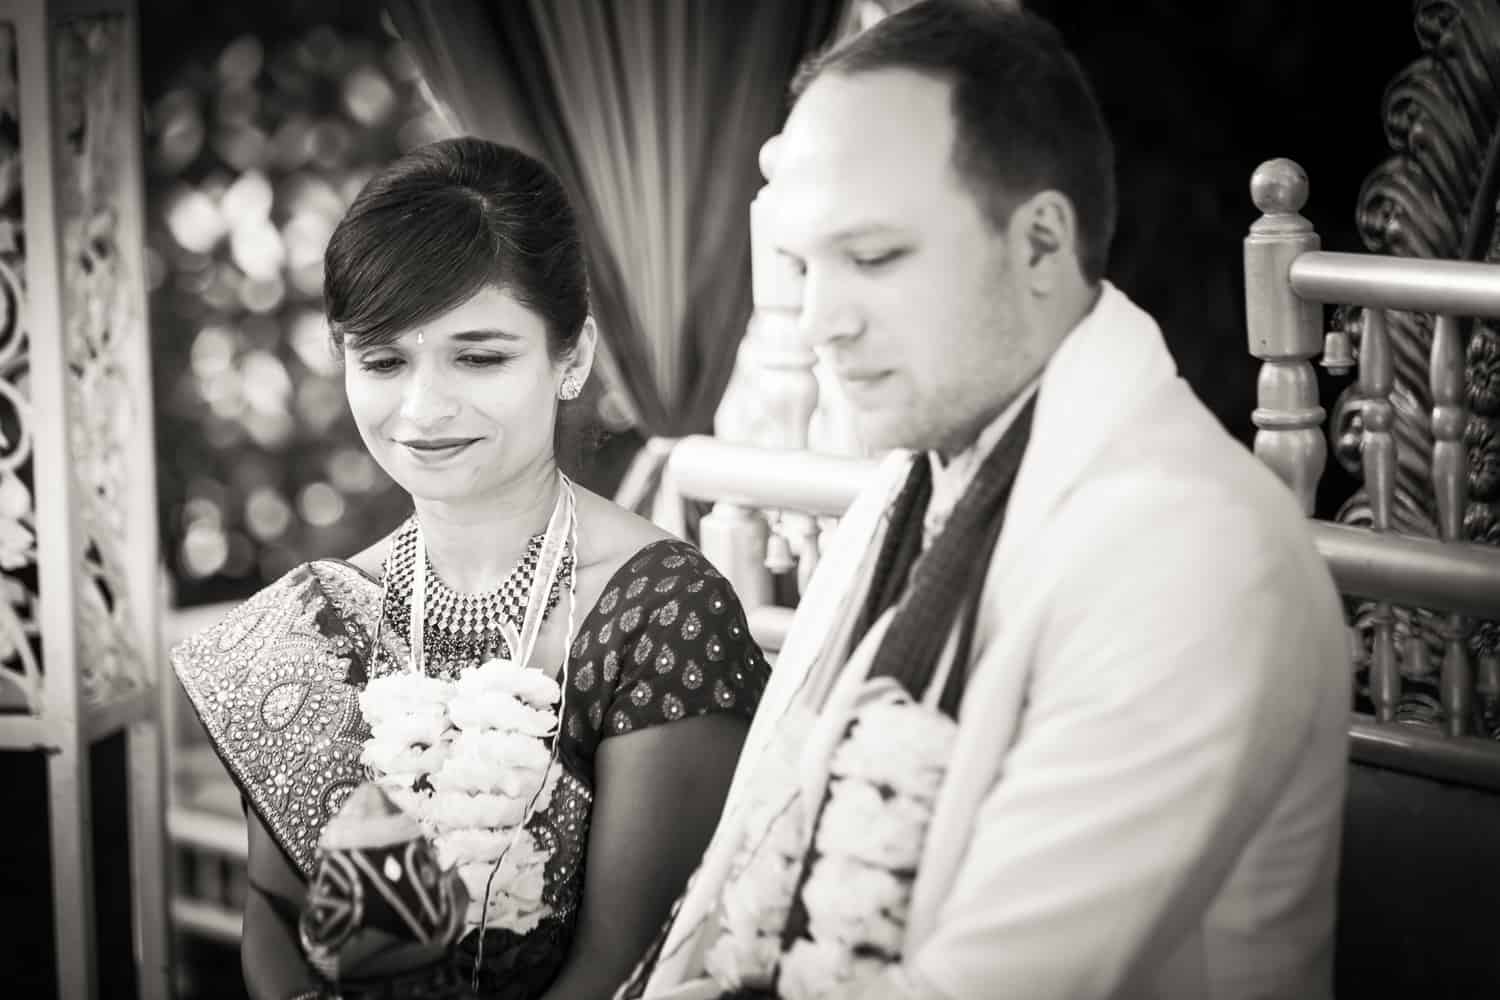 Black and white photo of bride and groom during traditional Hindu wedding ceremony